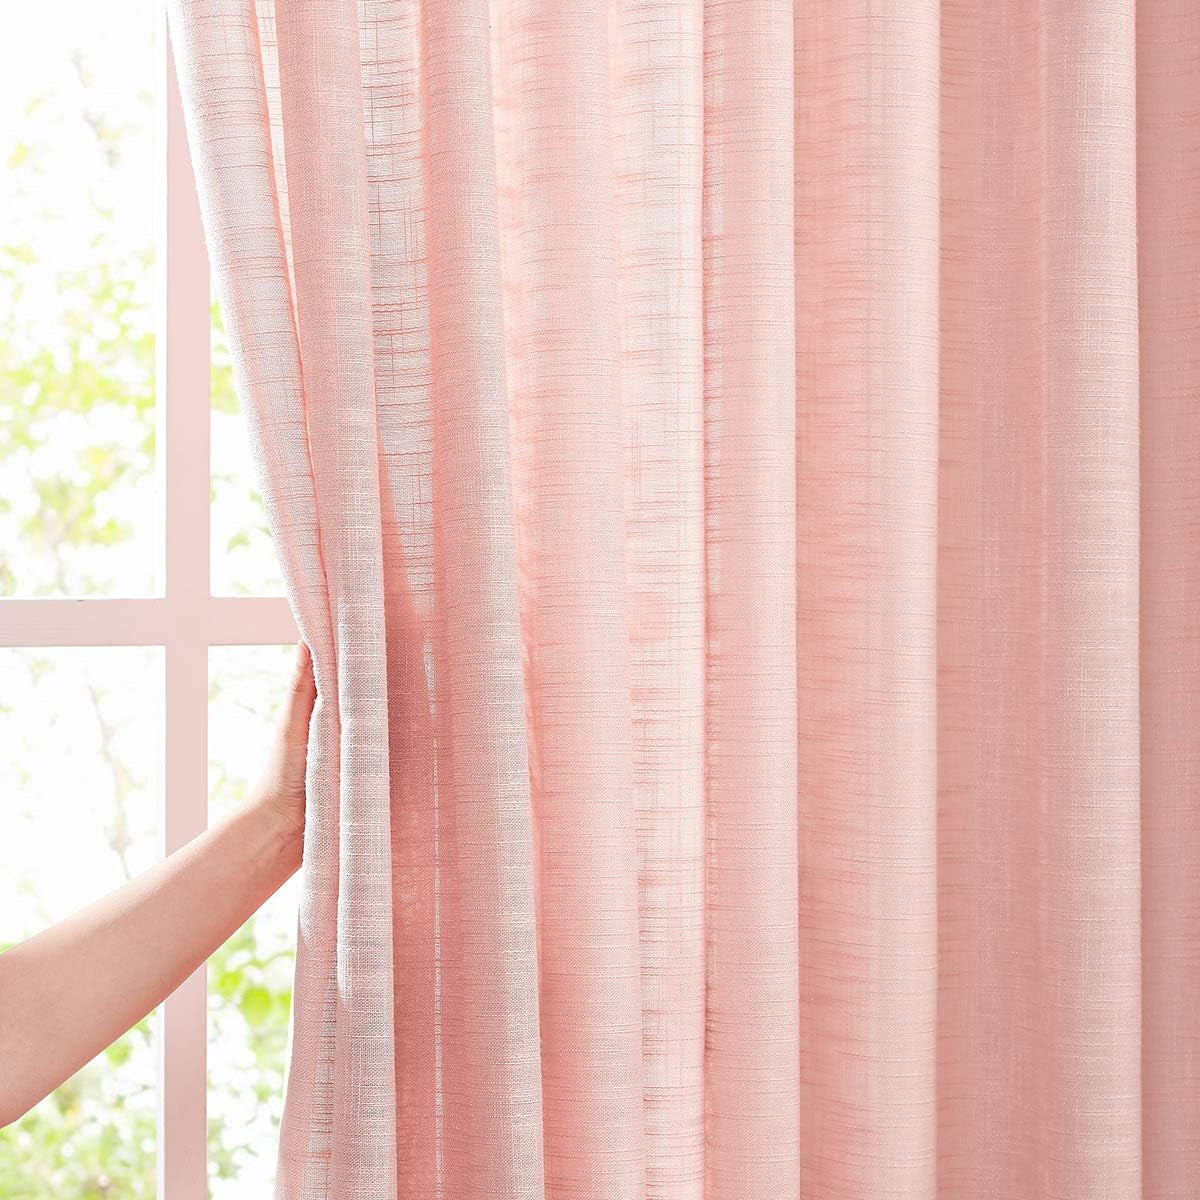 FMFUNCTEX Grey Semi-Sheer Curtains for Living Room Rich Linen Textured Rod Pocket Window Curtain Draperies for Guest Room Not See through 52”W X63”L Set of 2  Fmfunctex Coral/ Blush Pink 52" X 63" 2Pcs 